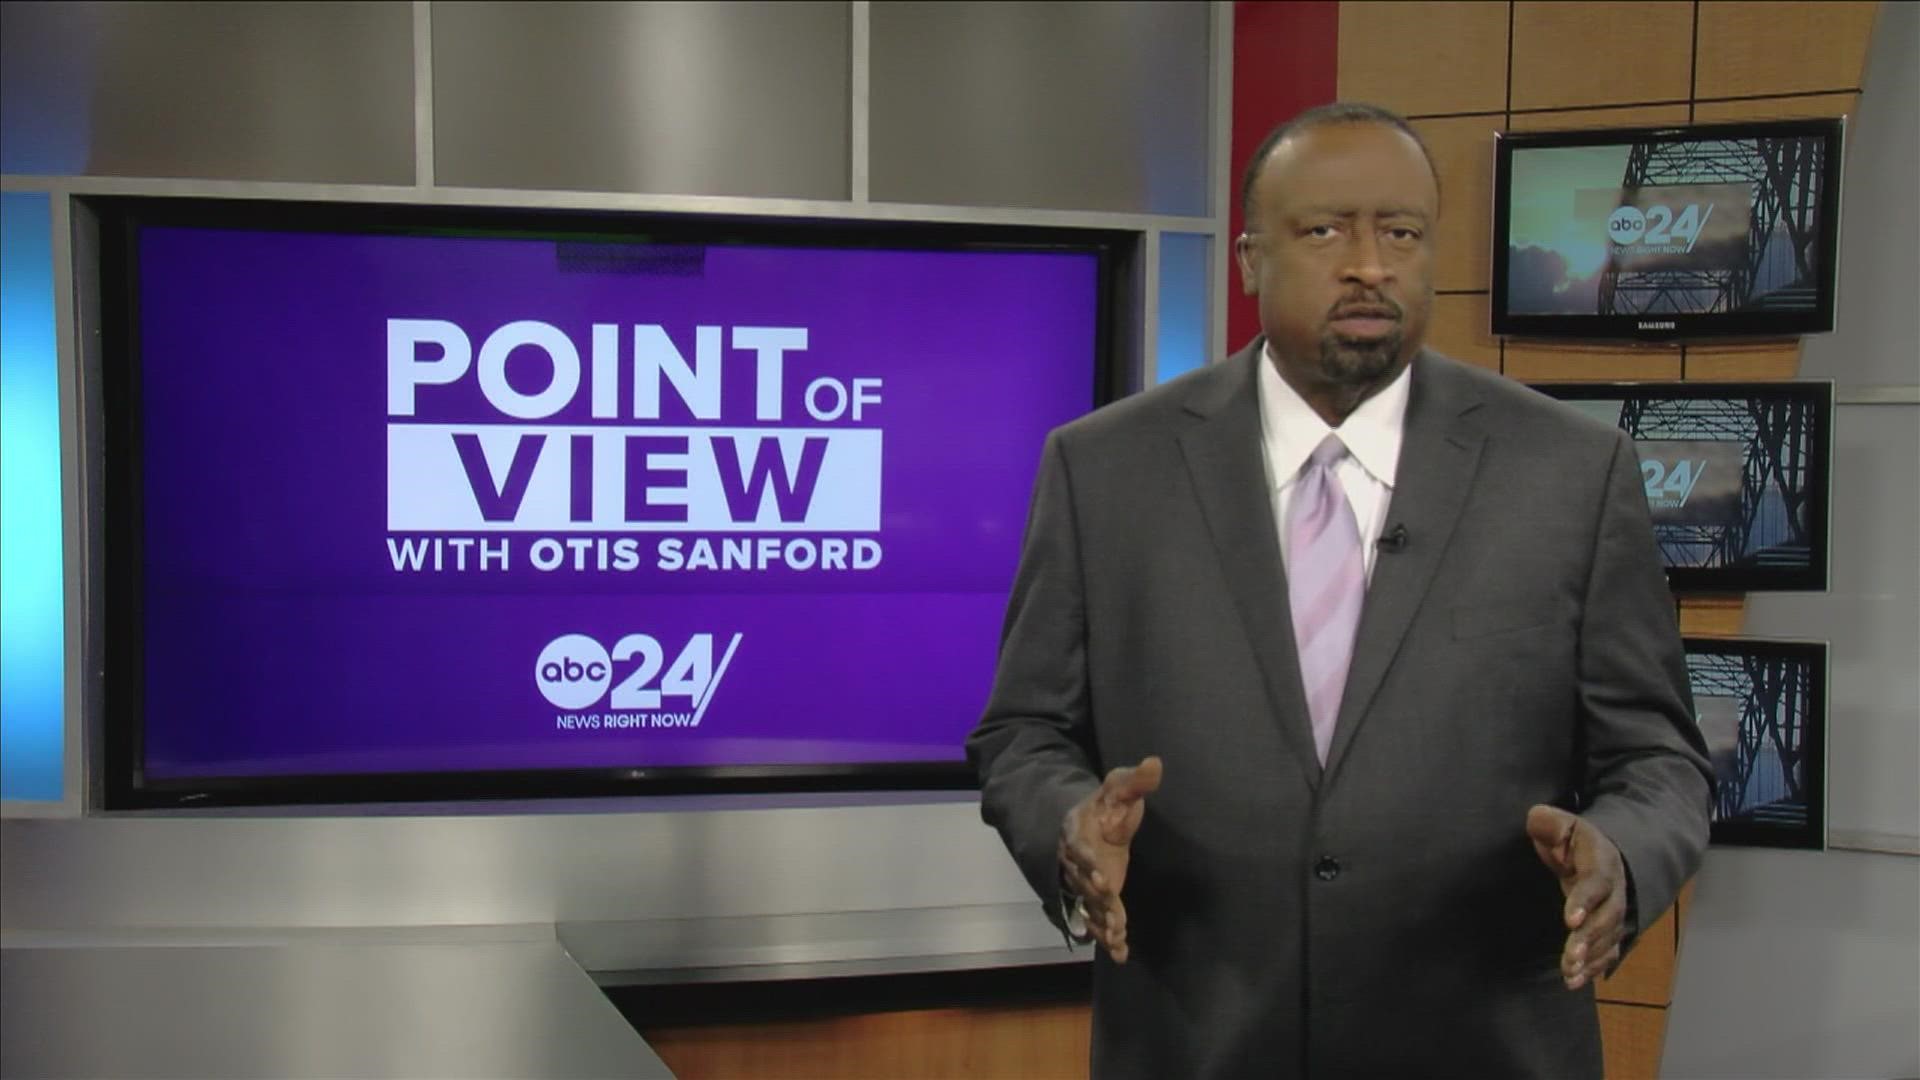 ABC 24 political analyst and commentator Otis Sanford shared his point of view on a proposal to do away with term limits for some City of Memphis positions.